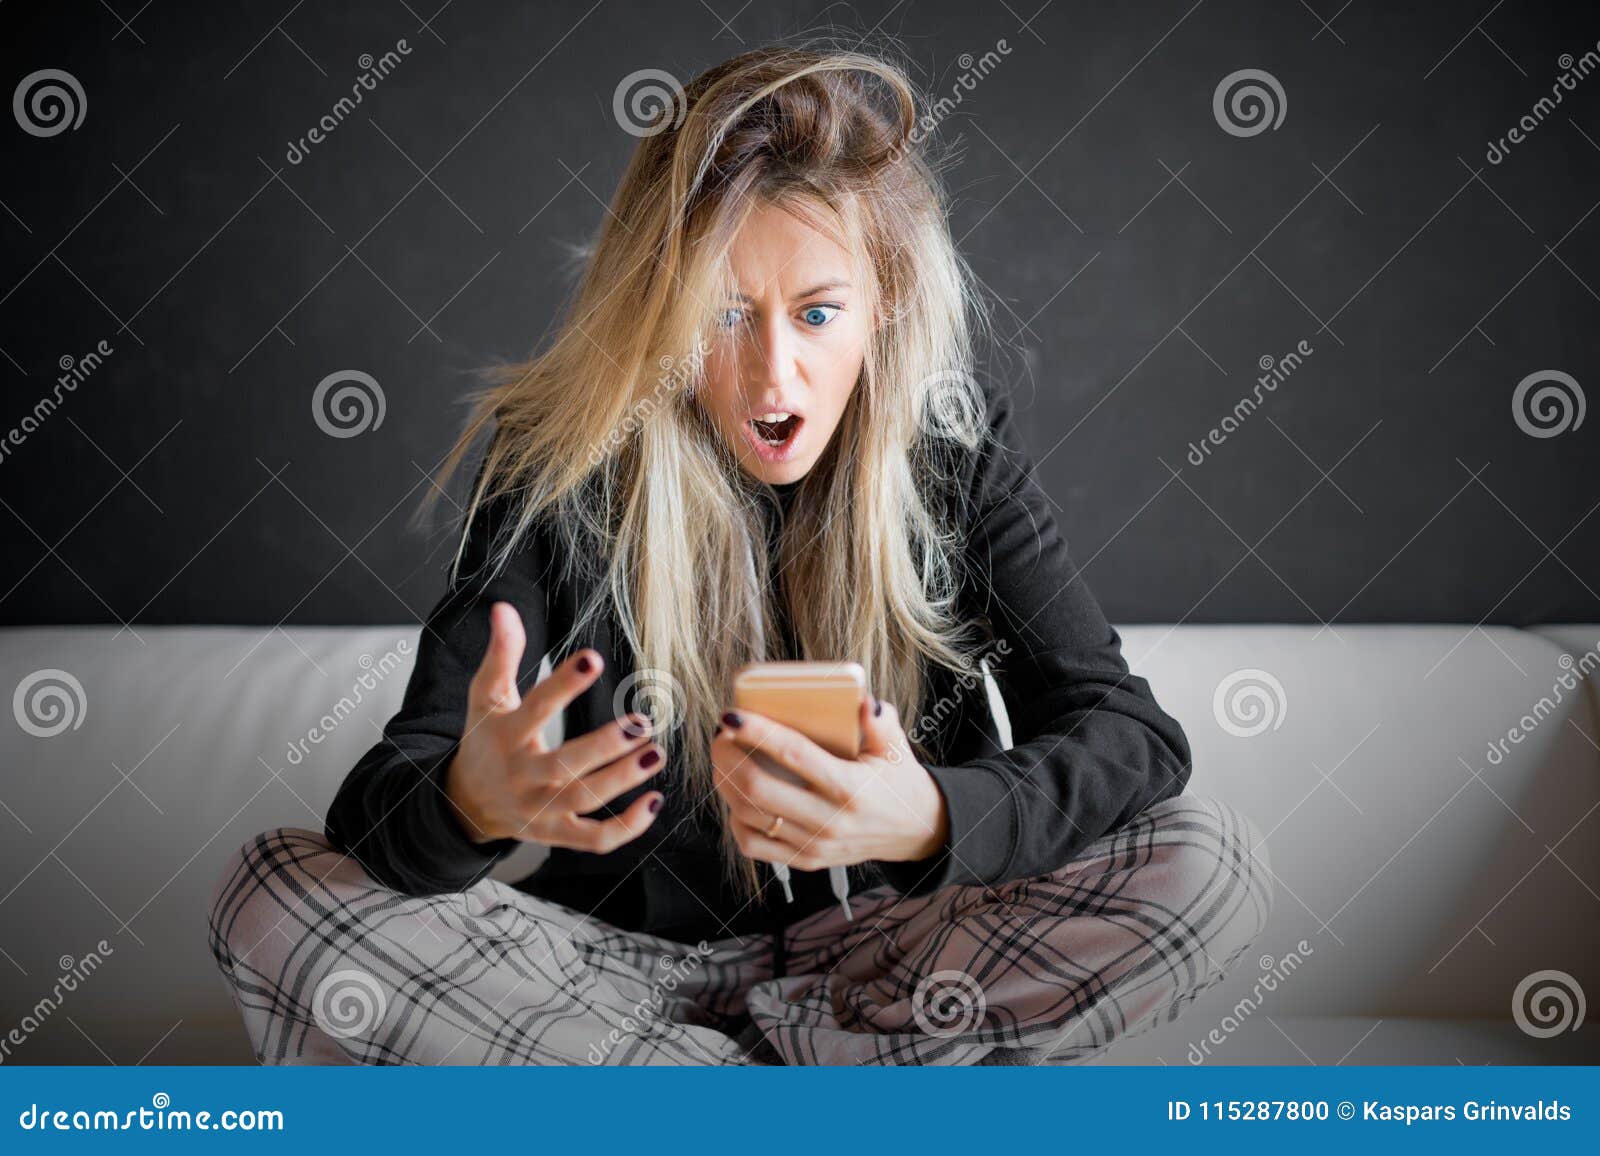 frustrated woman looking at her phone